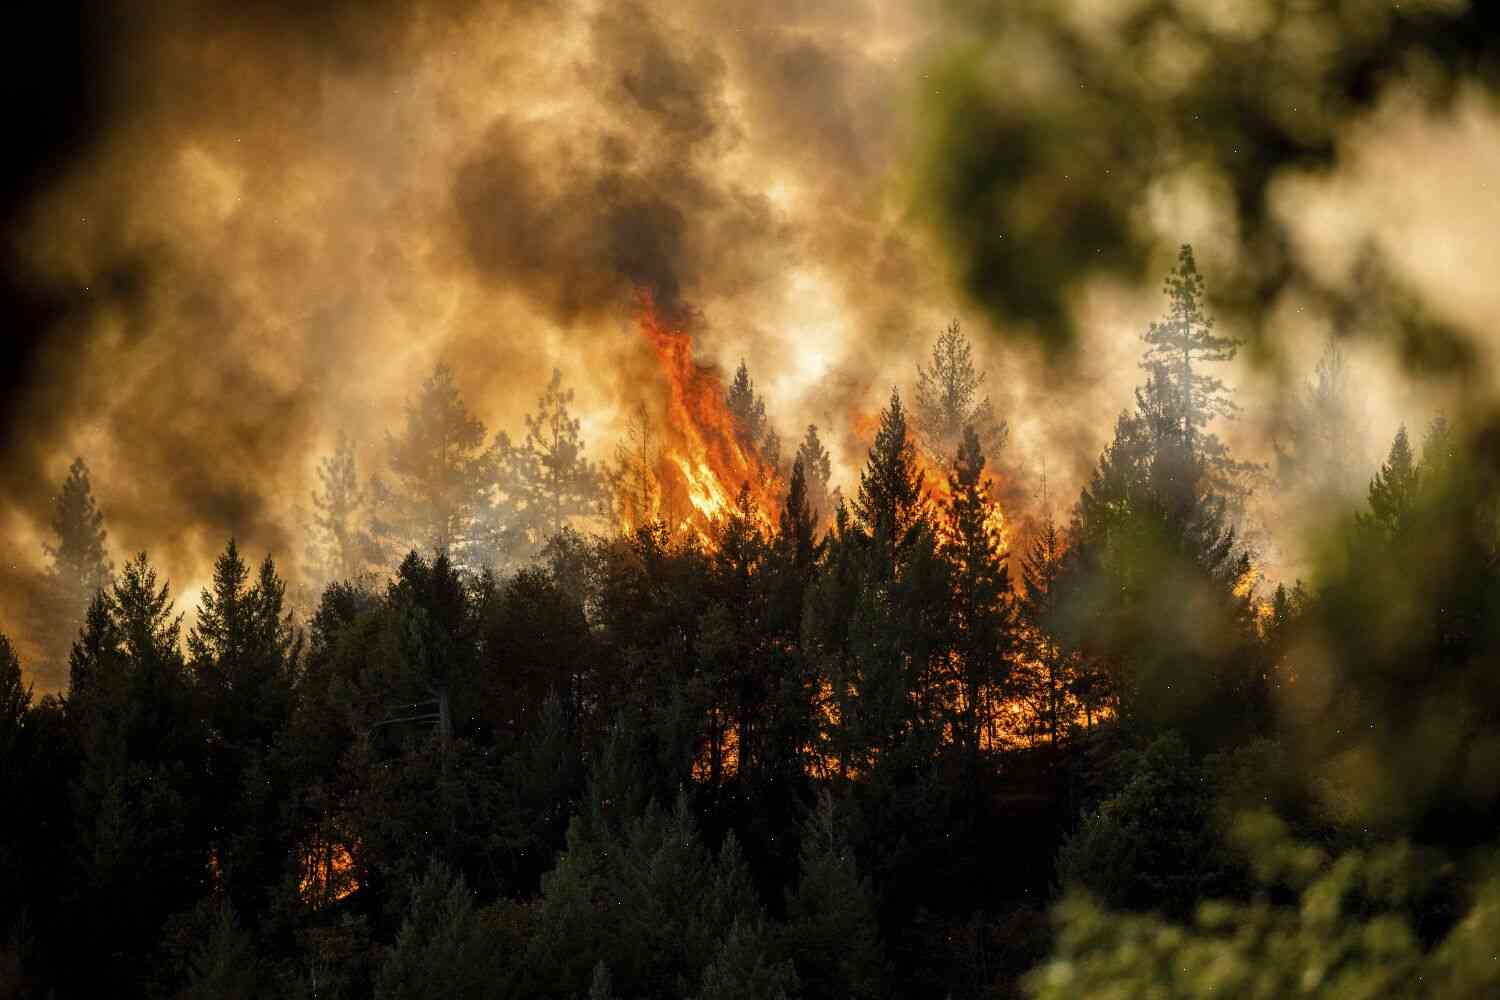 Firefighters could have to move up to 1,500 acres of land at a time